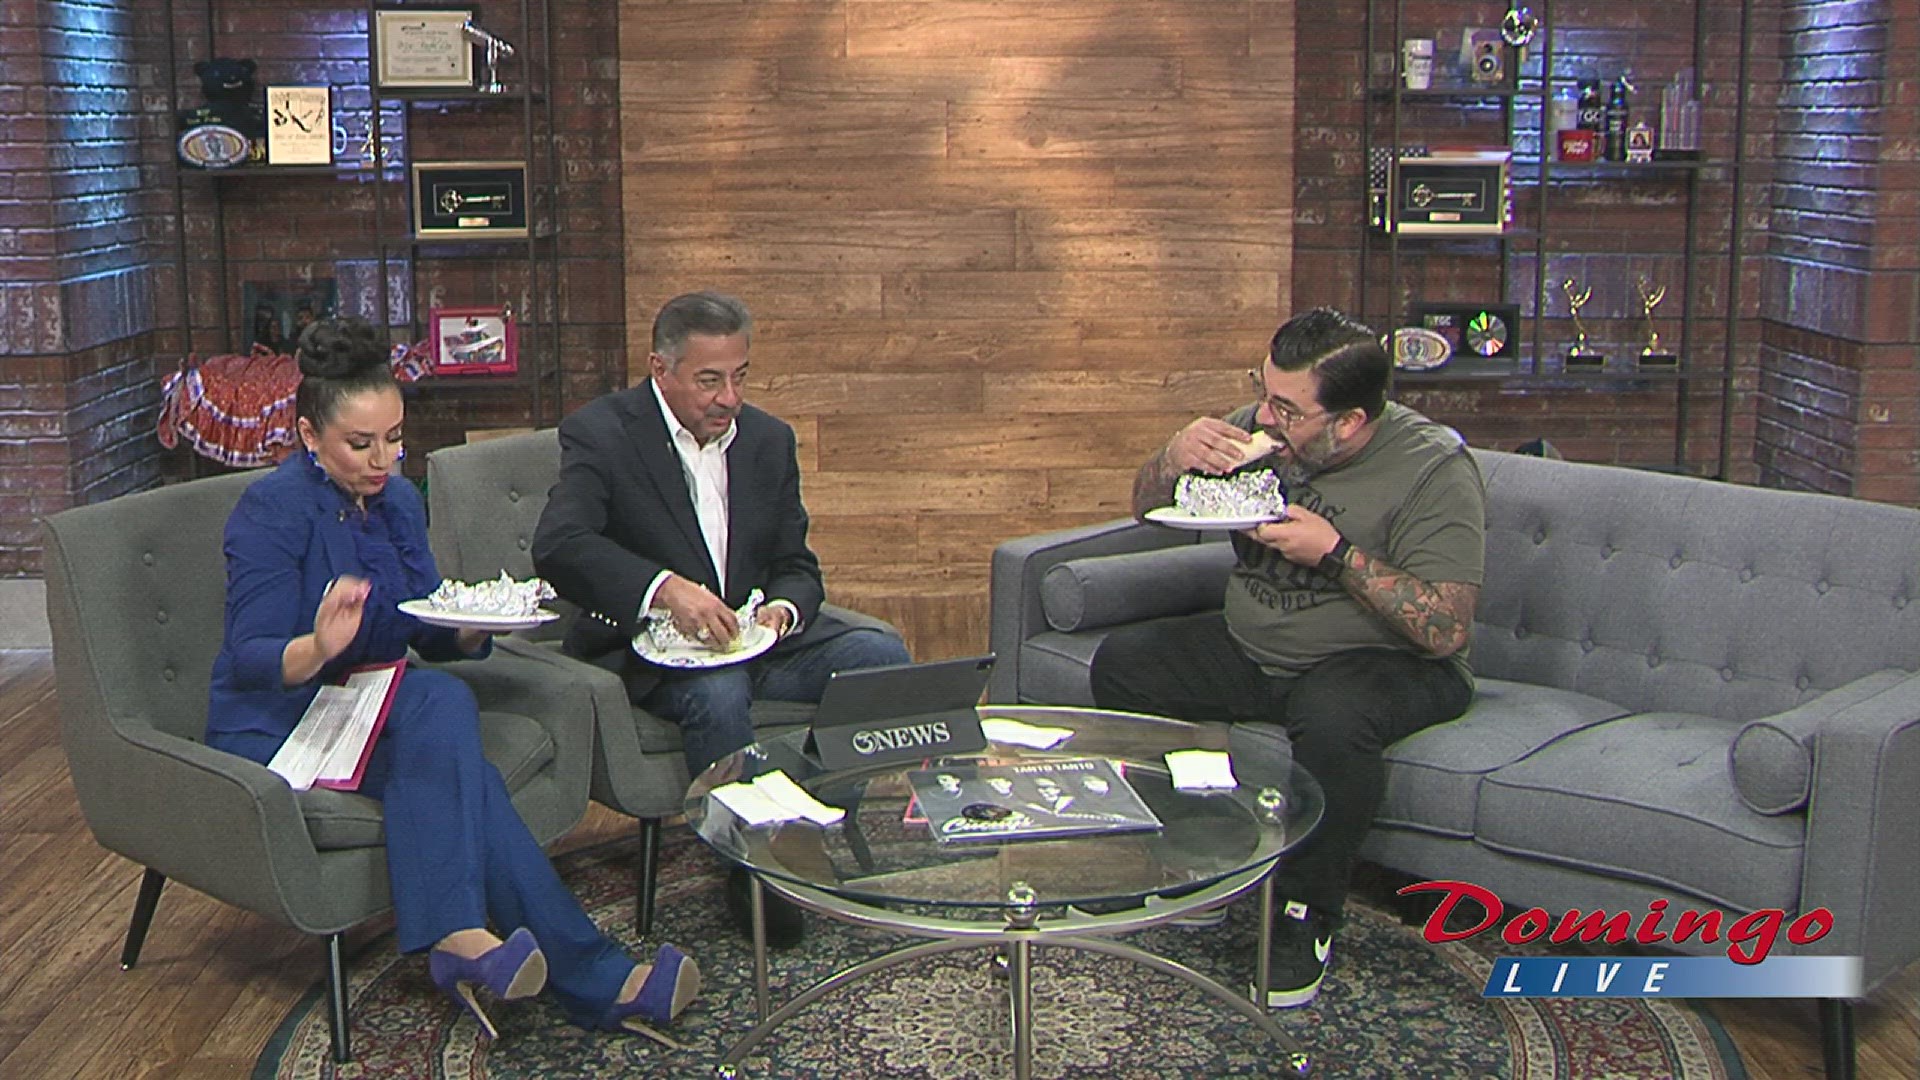 Taco Gear founder and local creative Gerald Flores joined us live to discuss the origins of his docuseries "The Taco Chair" and what to expect in its 5th season.